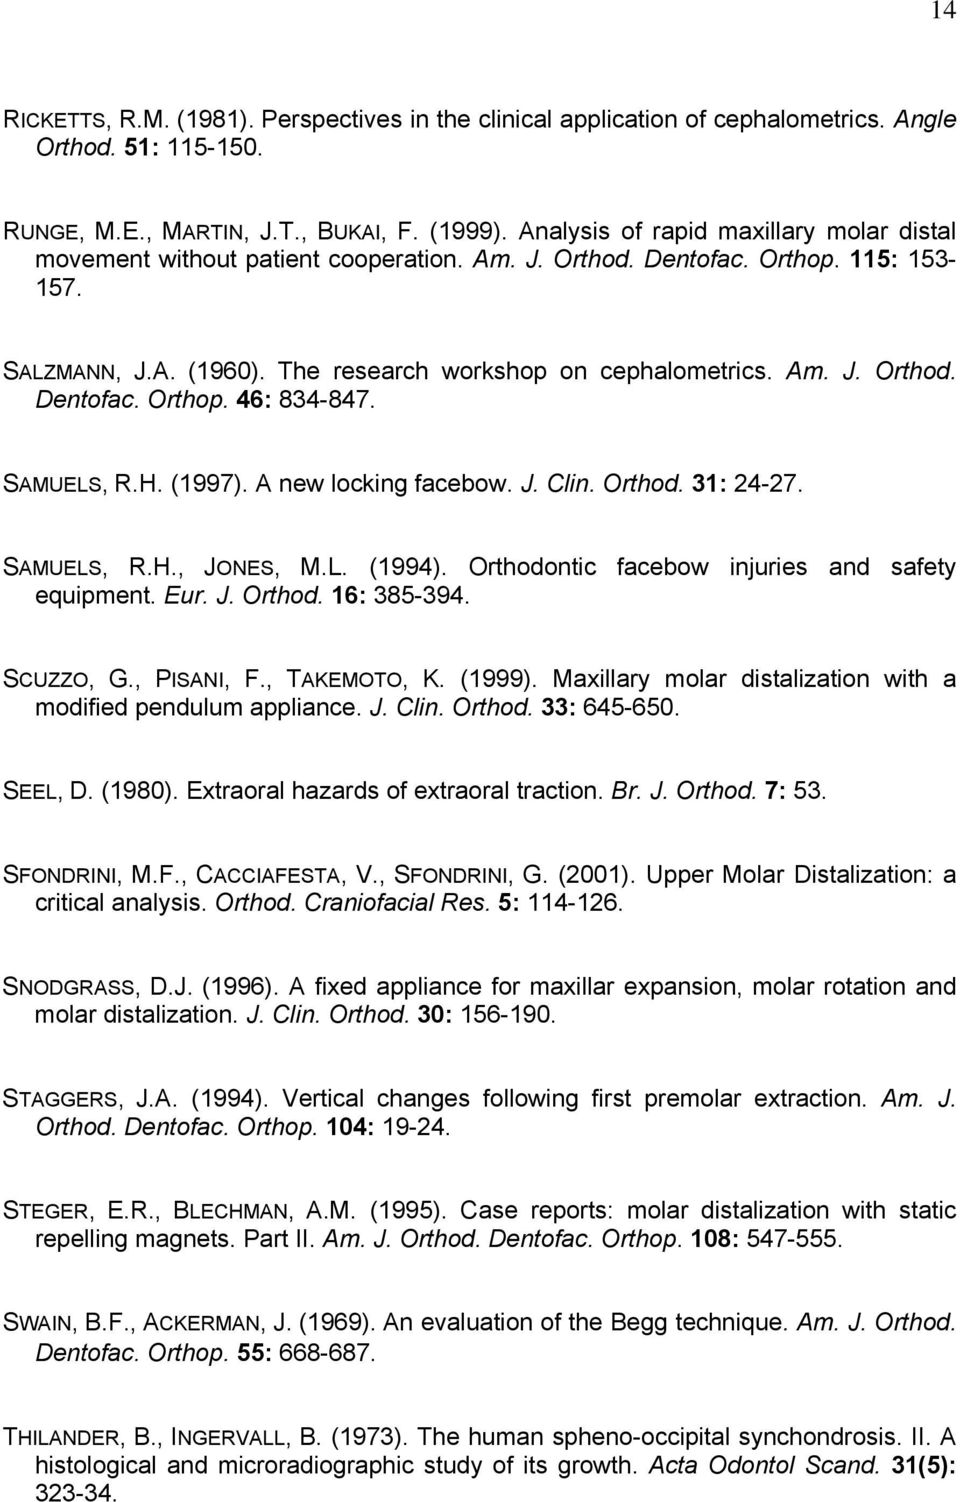 SAMUELS, R.H. (1997). A new locking facebow. J. Clin. Orthod. 31: 24-27. SAMUELS, R.H., JONES, M.L. (1994). Orthodontic facebow injuries and safety equipment. Eur. J. Orthod. 16: 385-394. SCUZZO, G.